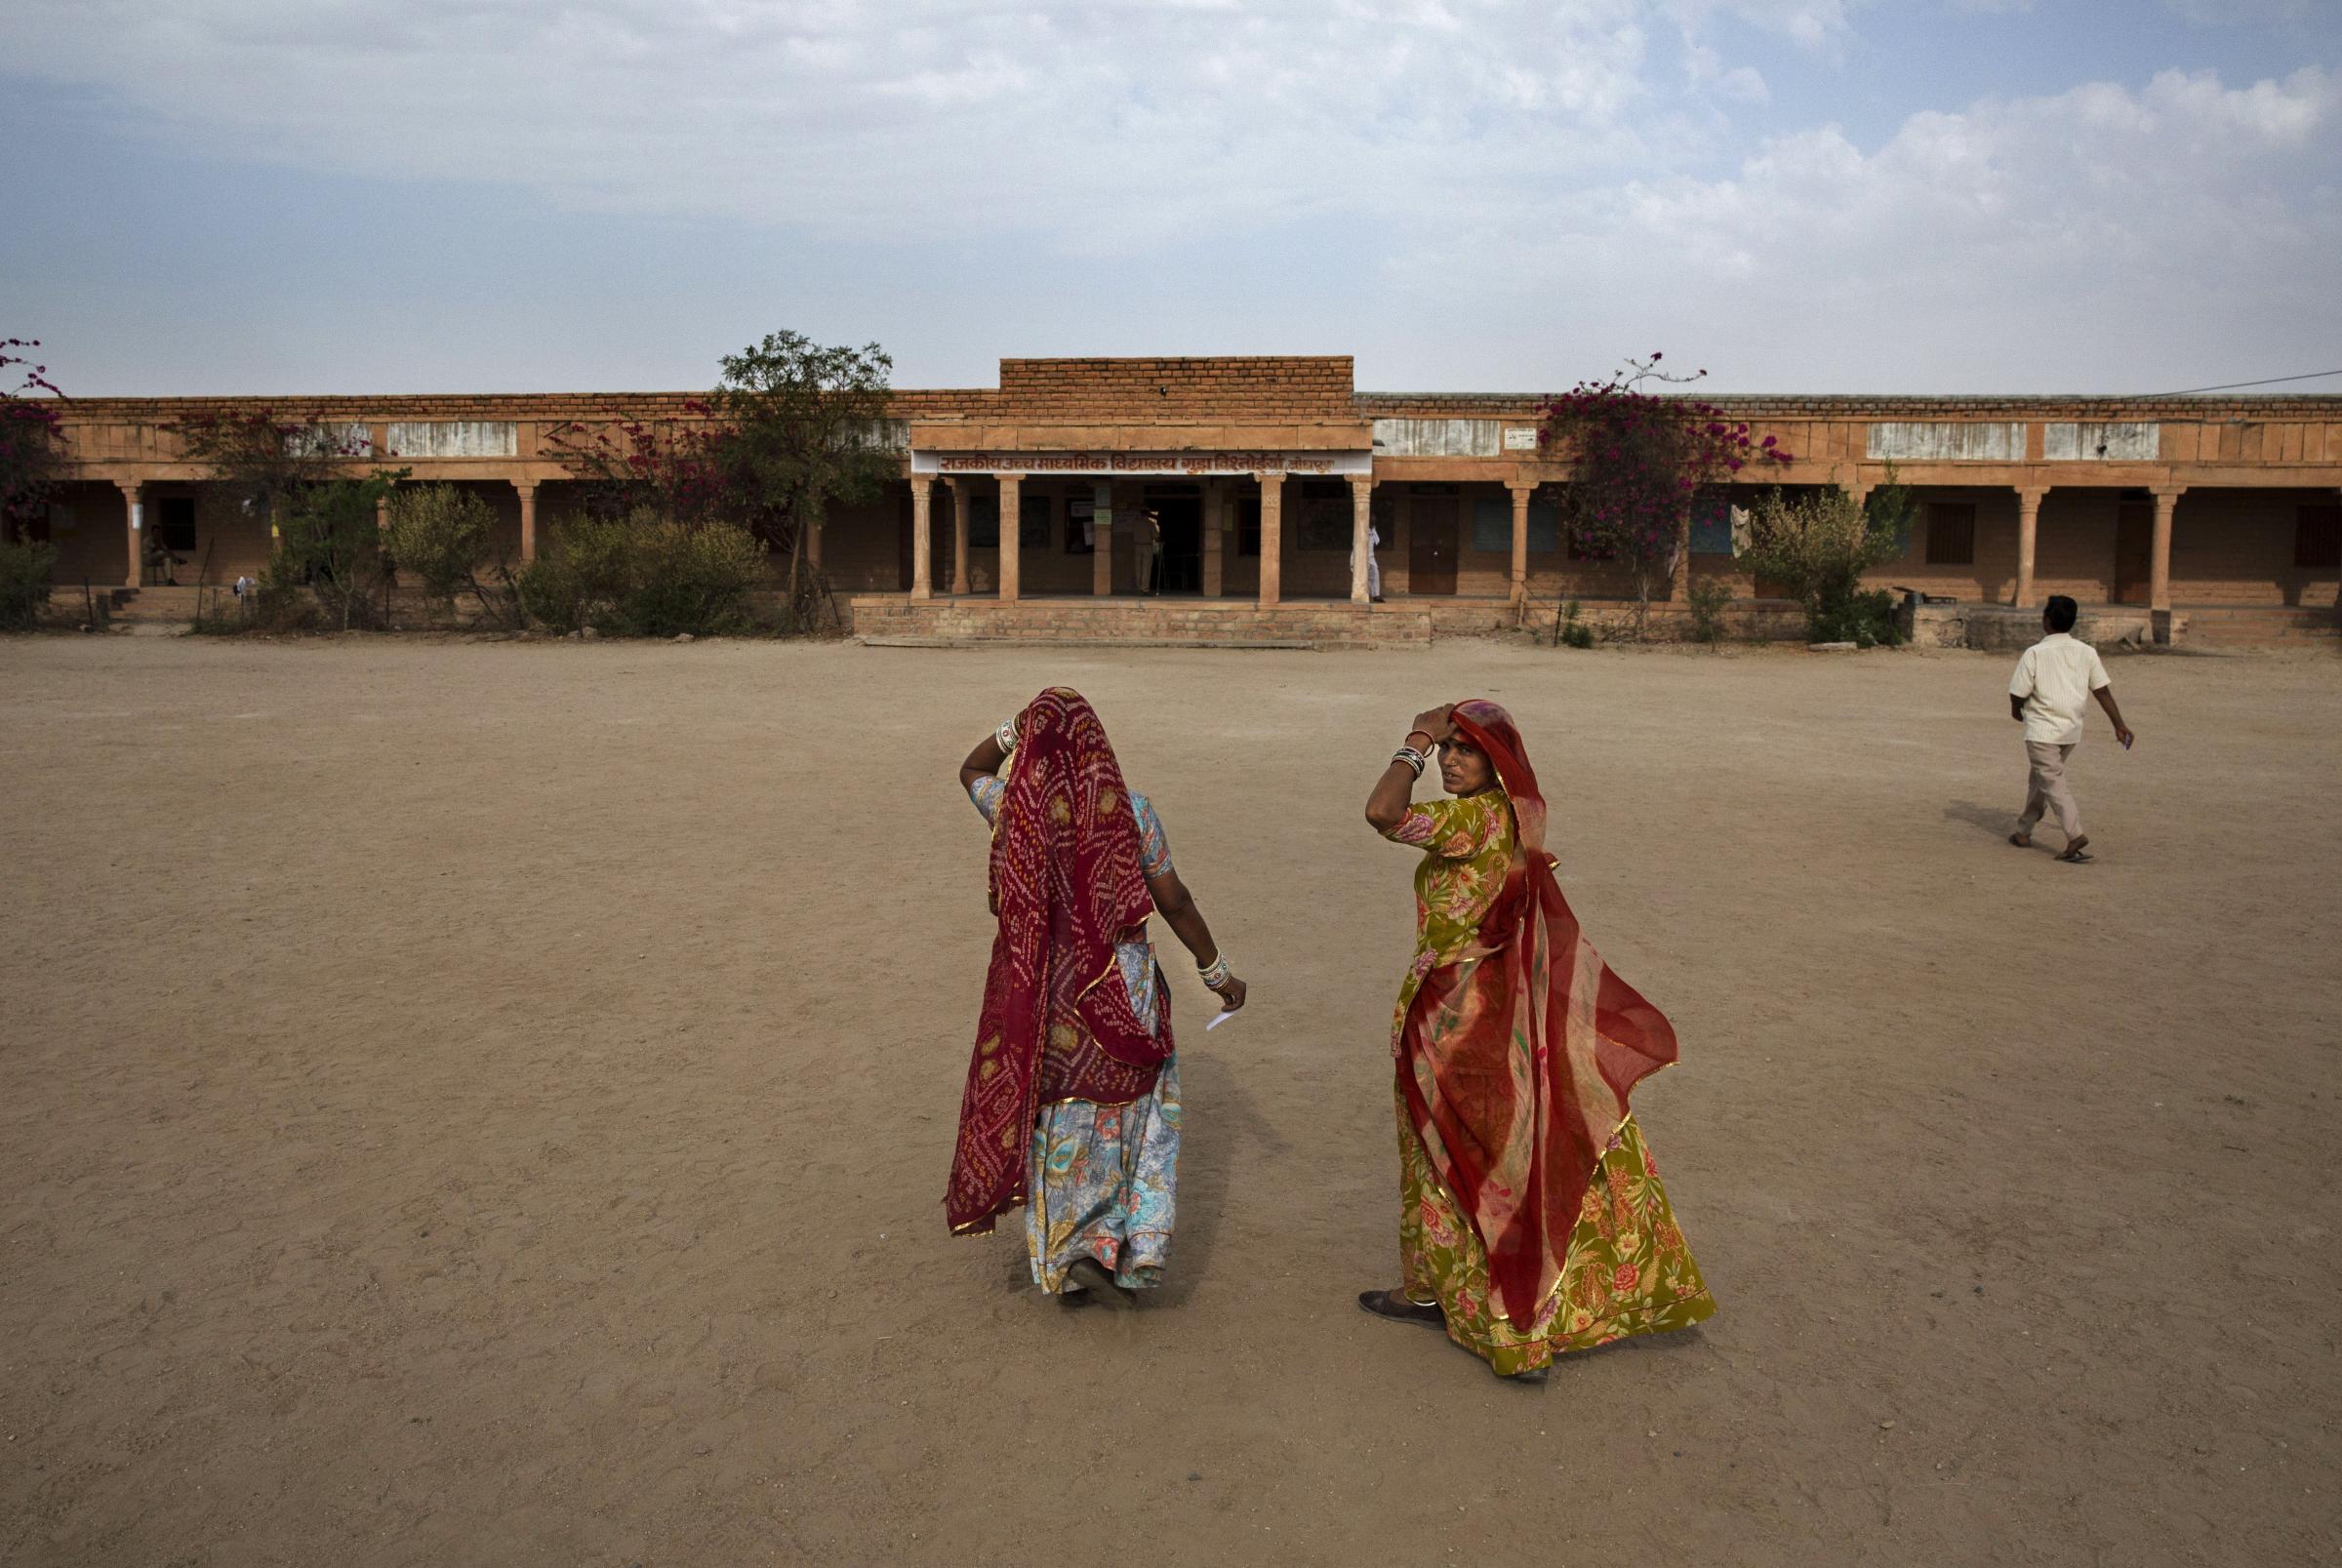 Indian women arrive to vote at a polling station on April 17, 2014 in the Jodhpur District in the desert state of Rajasthan.